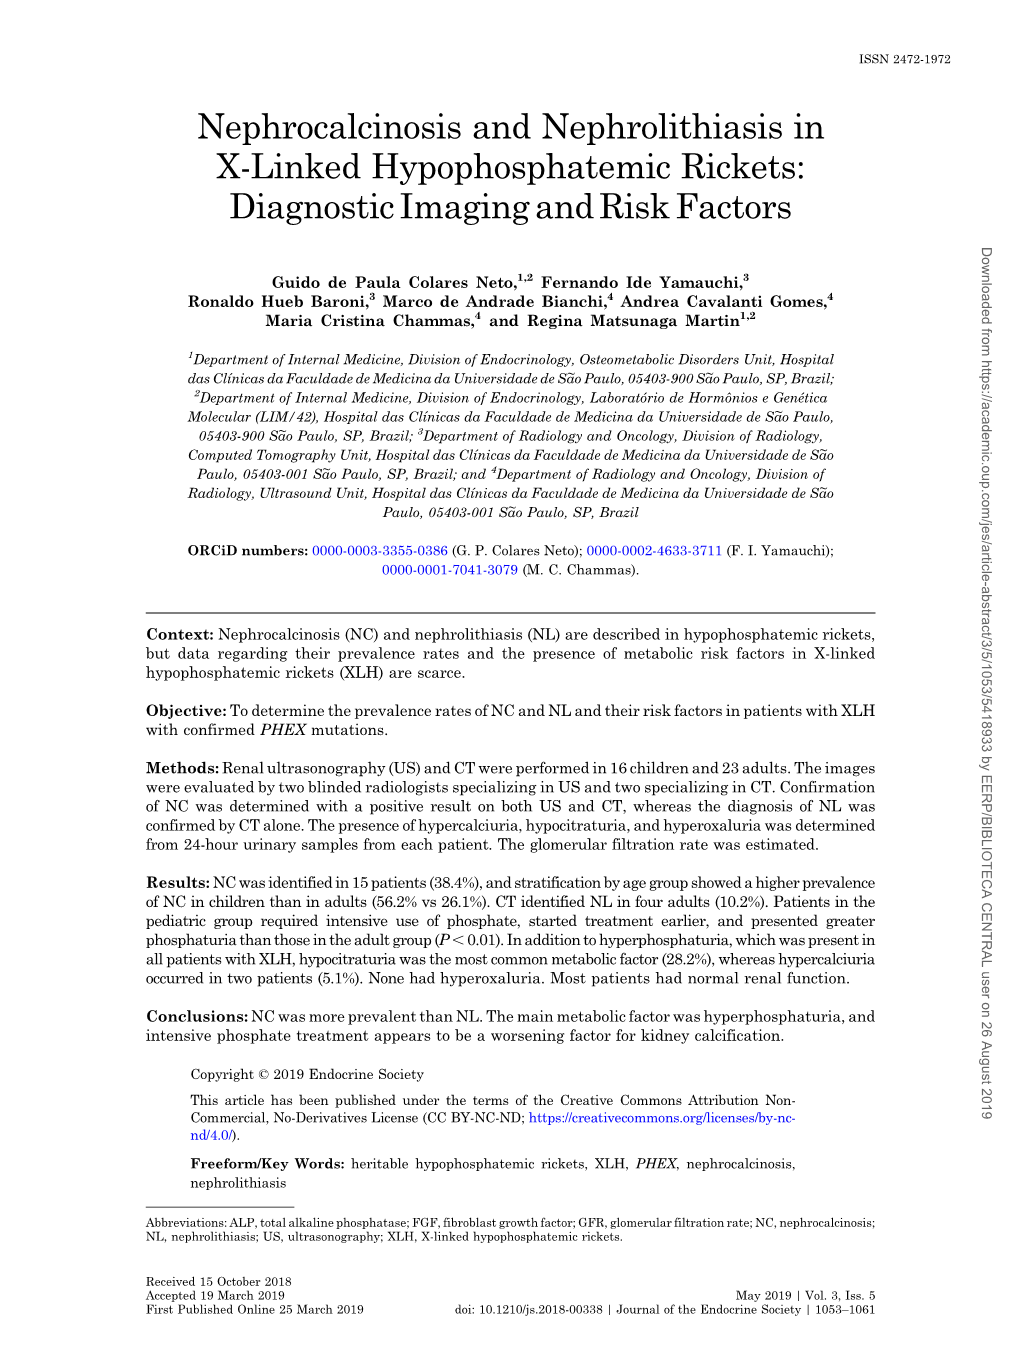 Diagnostic Imaging and Risk Factors Downloaded from by EERP/BIBLIOTECA CENTRAL User on 26 August 2019